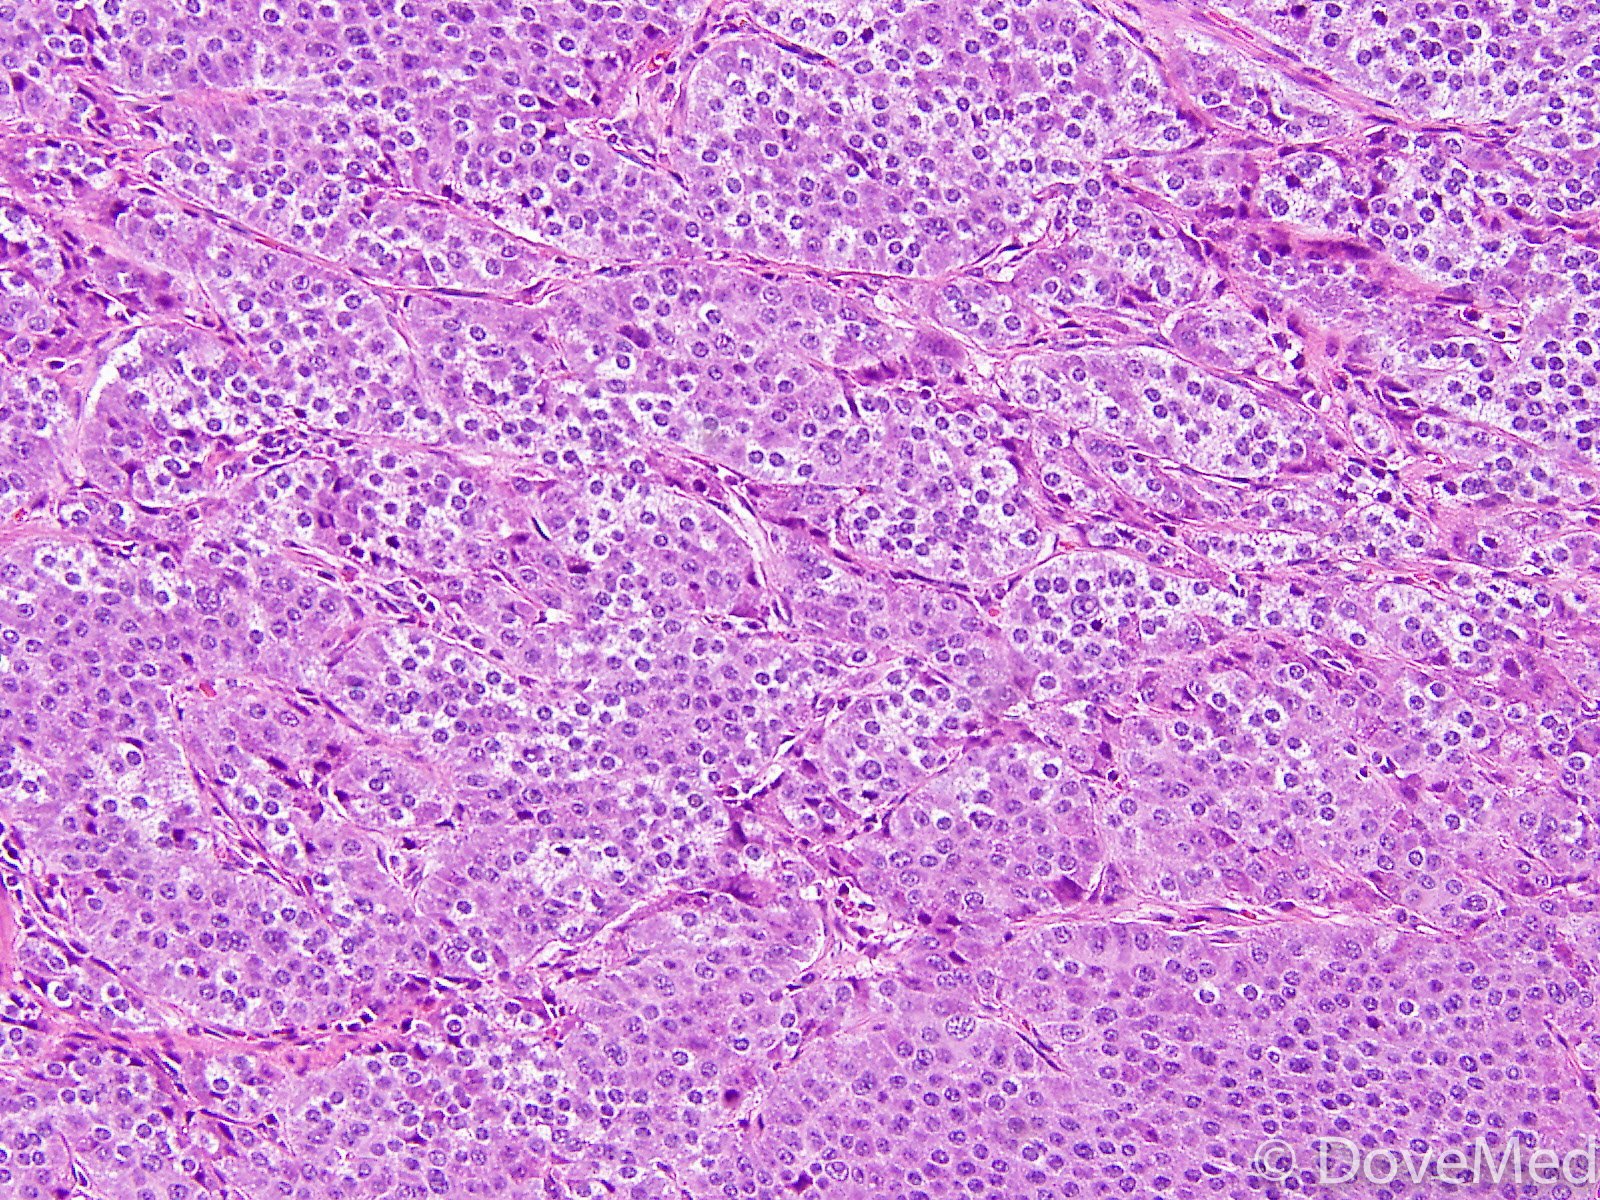 Atypical Glomus Tumor